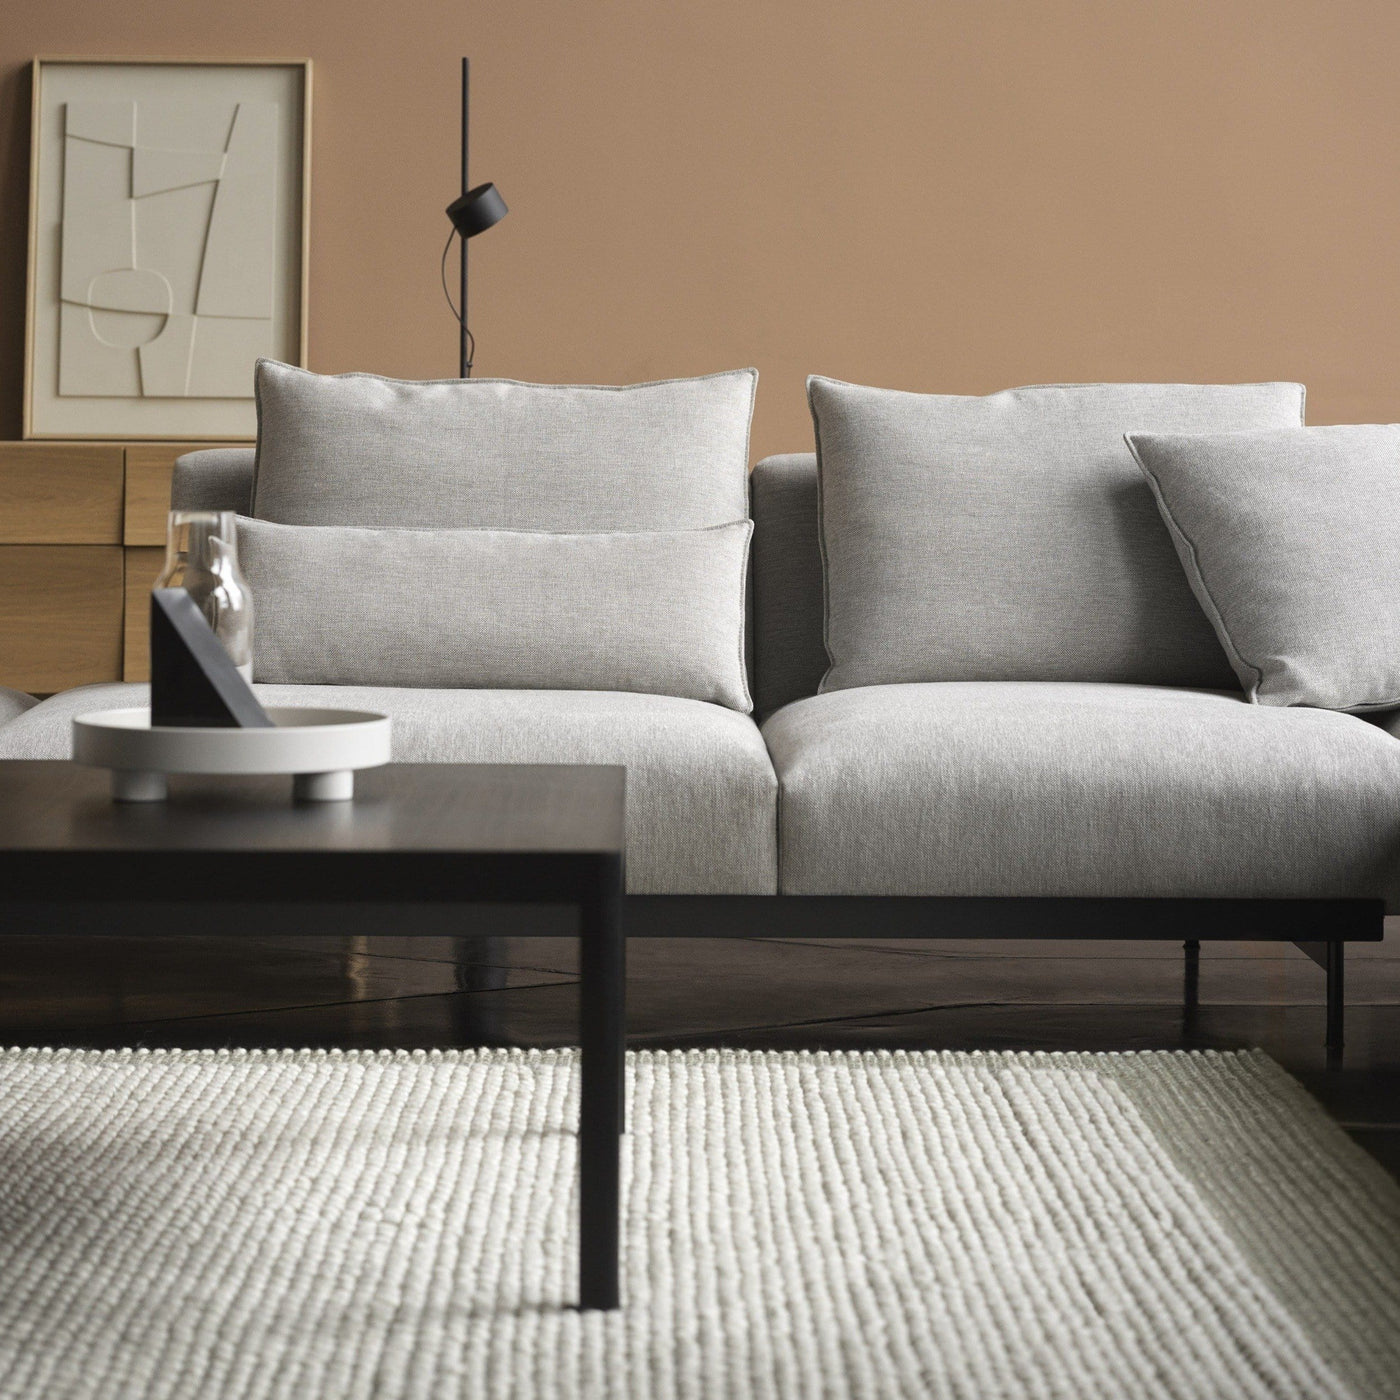 Muuto In Situ Modular Sofa Series. Made to order from someday designs #clay-12